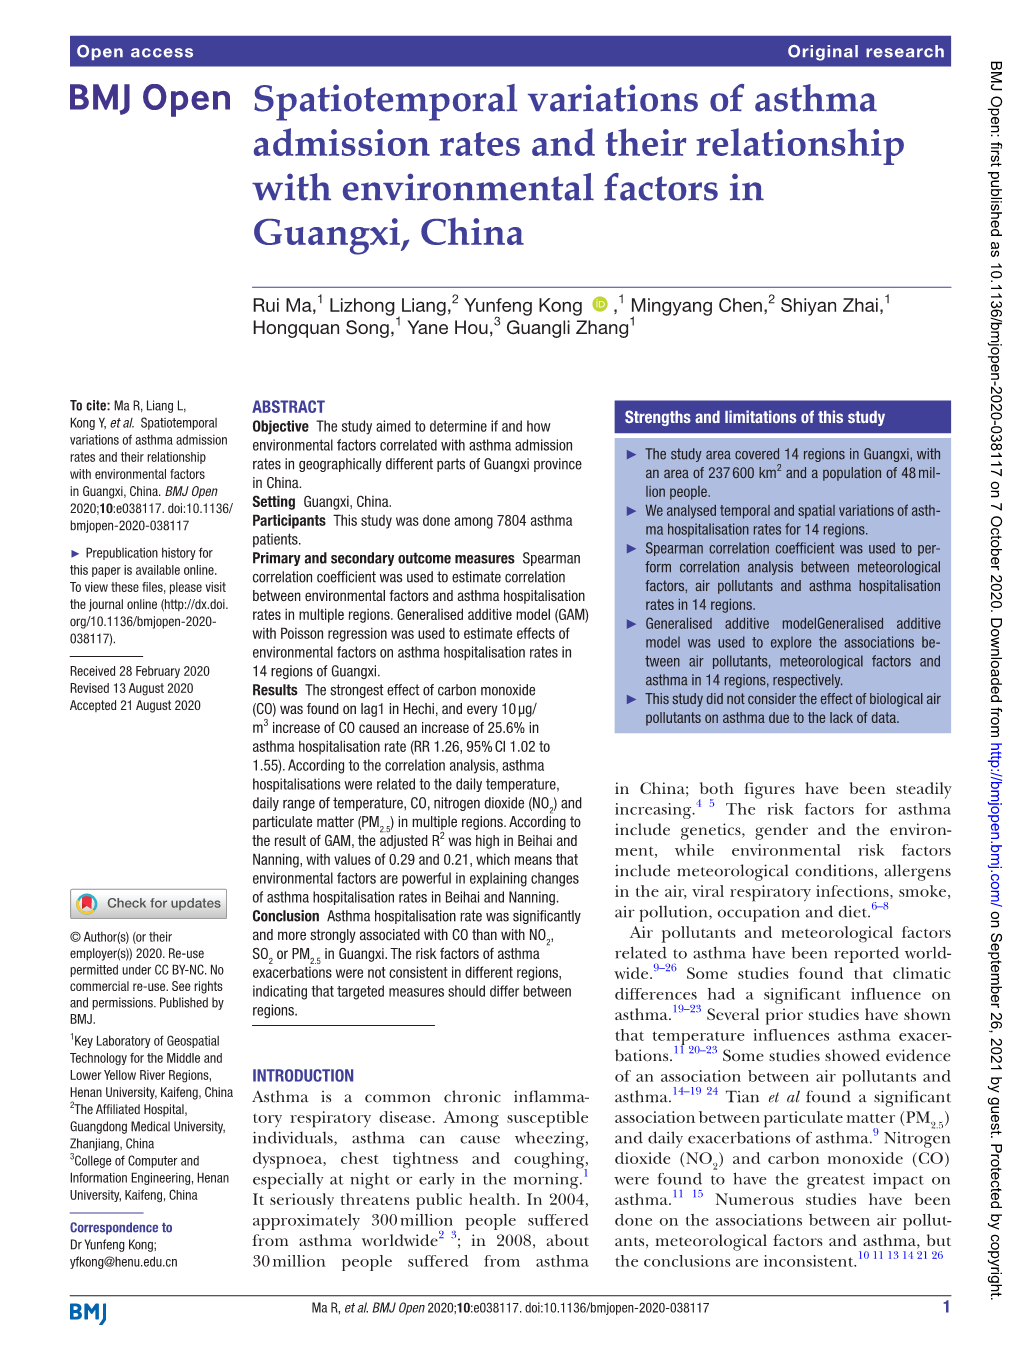 Spatiotemporal Variations of Asthma Admission Rates and Their Relationship with Environmental Factors in Guangxi, China